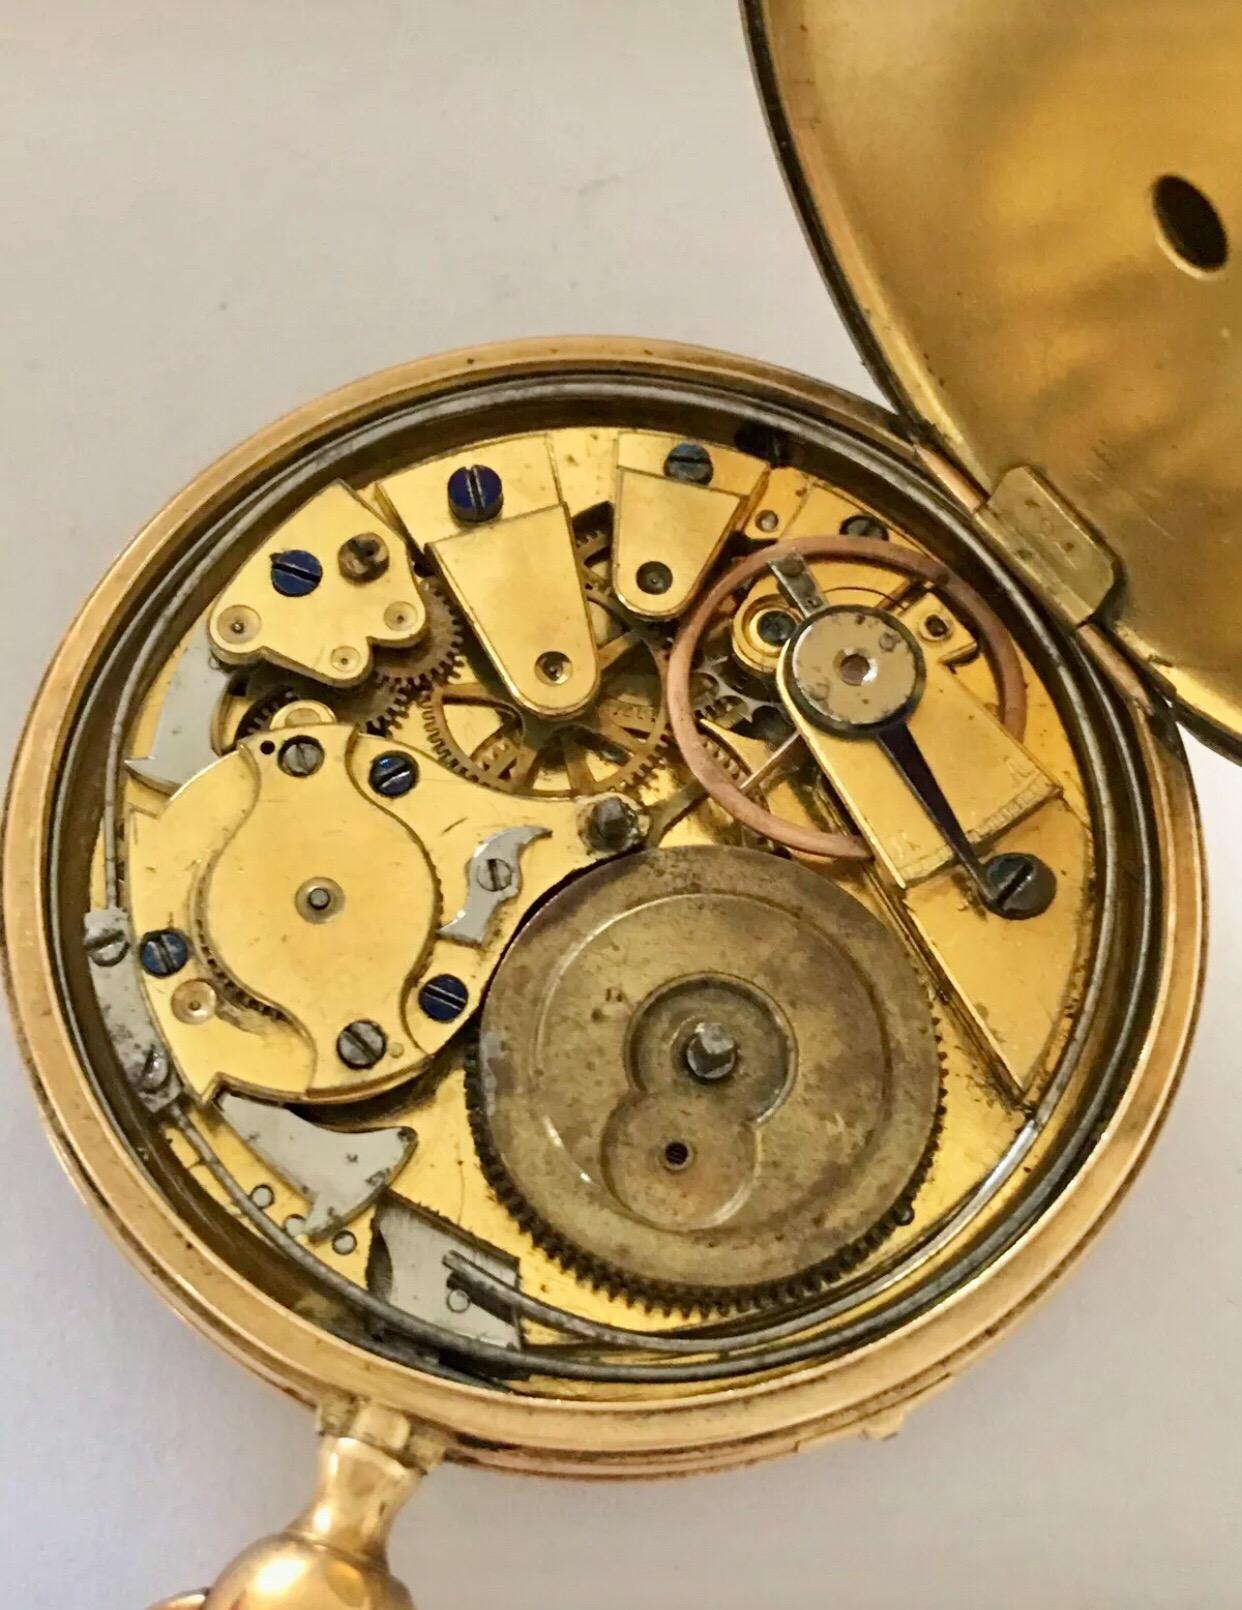 18 Karat Gold Antique Quarter Repeater Pocket Watch In Good Condition For Sale In Carlisle, GB